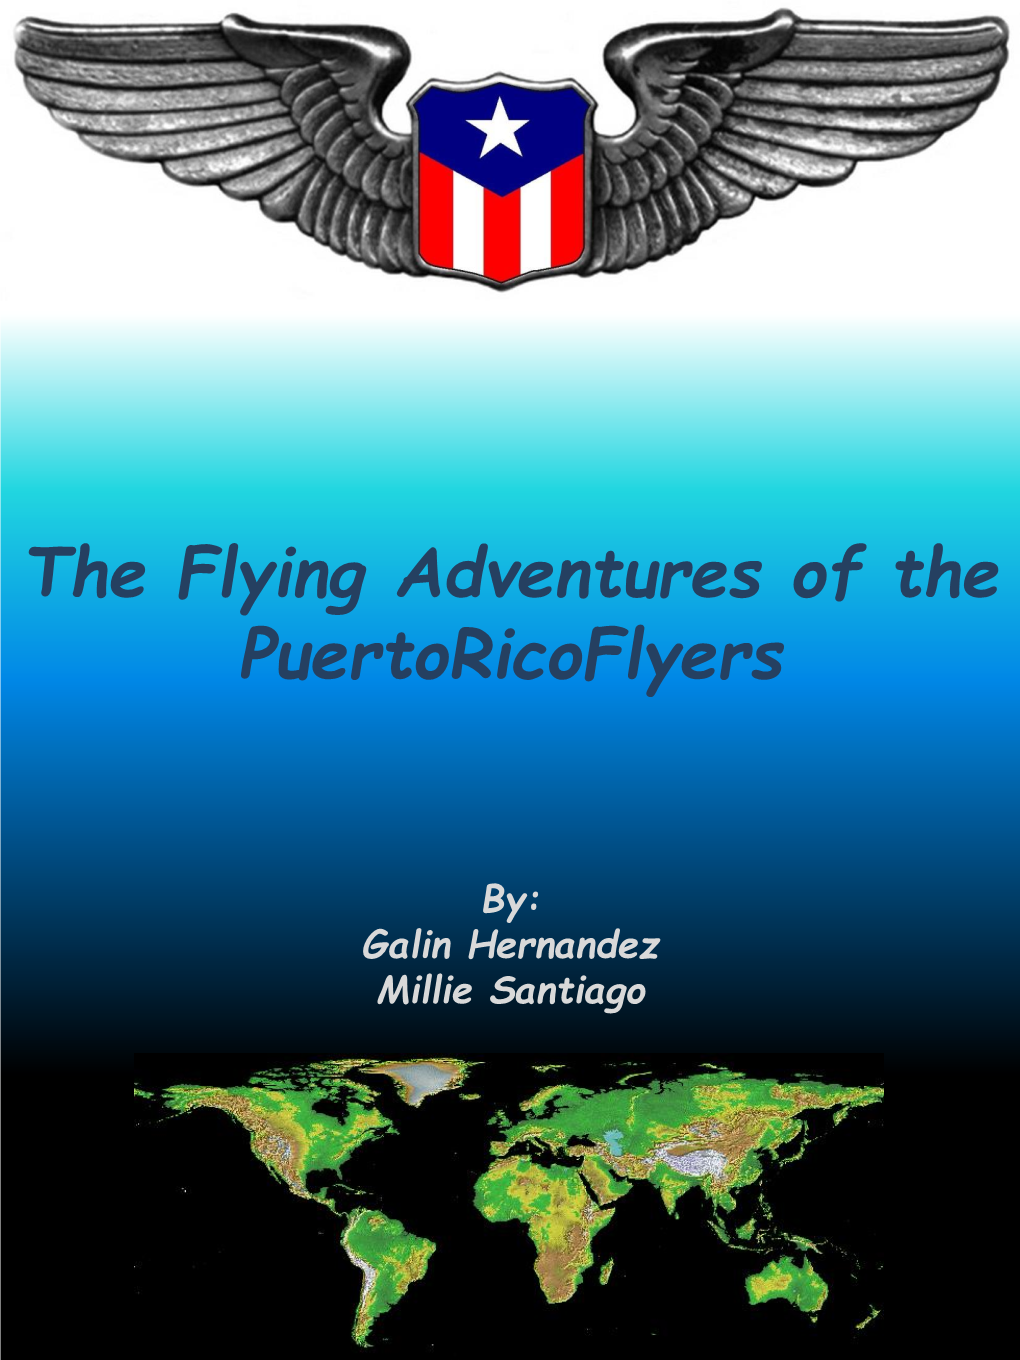 The Flying Adventures of the Puertoricoflyers